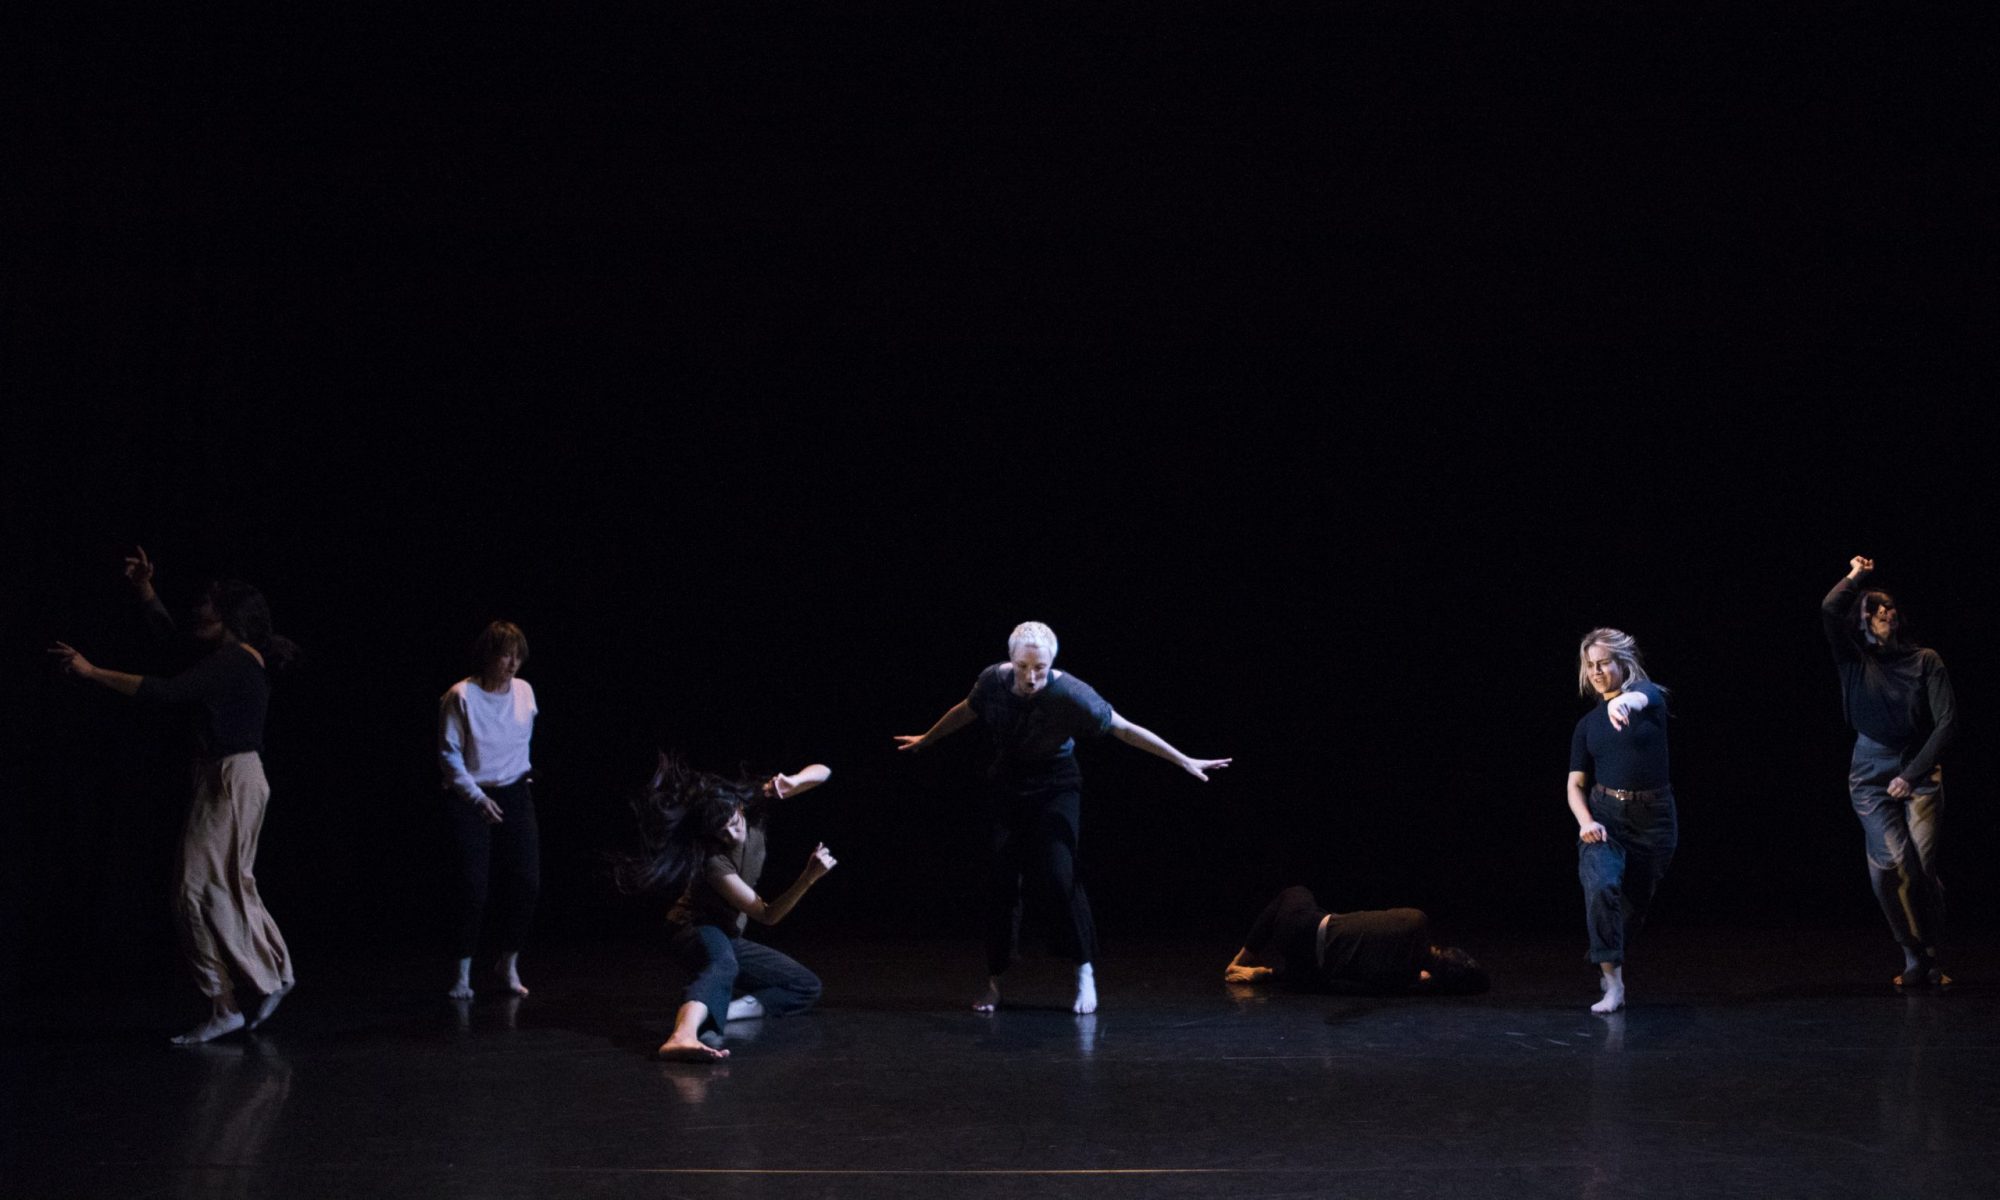 Seven dancers dancing in the dark. Left to right: A dancer facing stage left, turned away from the camera. They are mid jump and their arms are stretched out. A dancer standing facing towards the camera, stood slightly back on the stage. A dancer low on the floor, their left knee is on the floor and their right leg is stretched out towards the camera. Both their arms are bent and they are flicking their head towards the camera. A dancer stood in the centre of the stage, their arms are stretched out by their sides and they are looking at the floor. A dancer curled up on the stage floor, their back facing the camera and their head to the side. A dancer pointing towards the camera with their left hand, while stepping forwards. A dancer stood on the stage facing towards the camera, with their right arm above their head in a fist and the other by their legs.